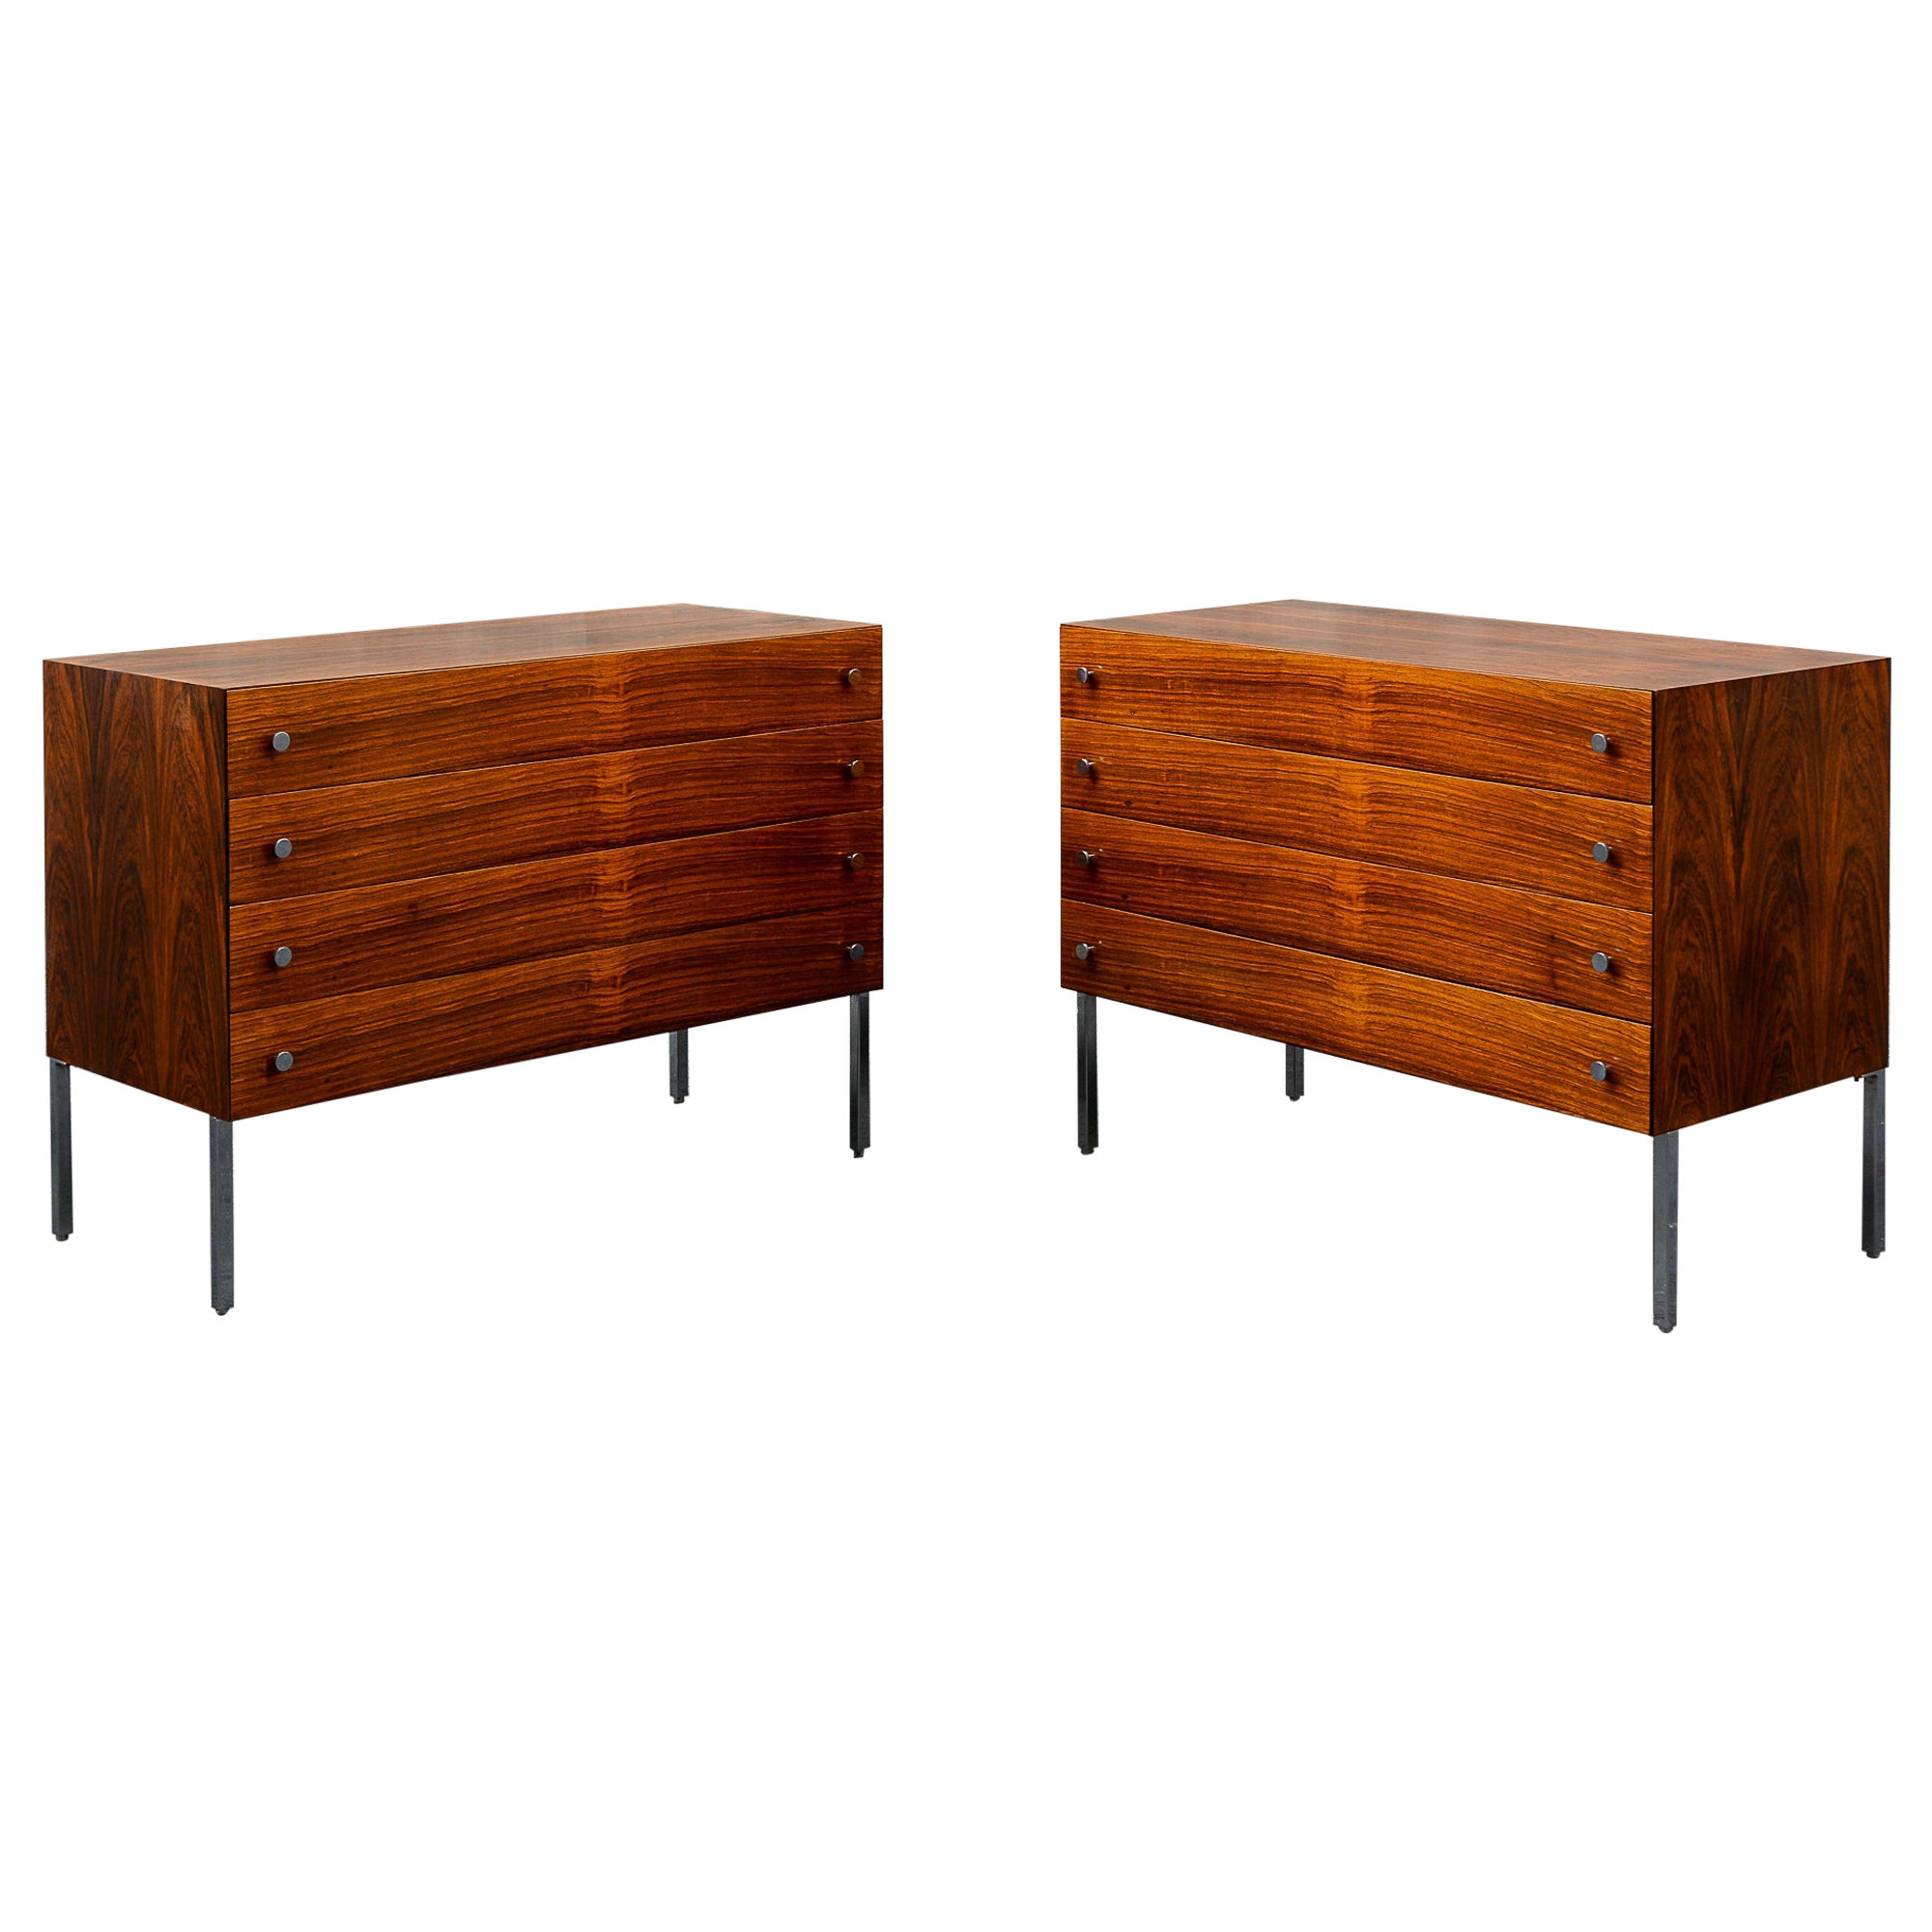 Pair of Rosewood Chests by Poul Norreklit for Sigurd Hansen For Sale